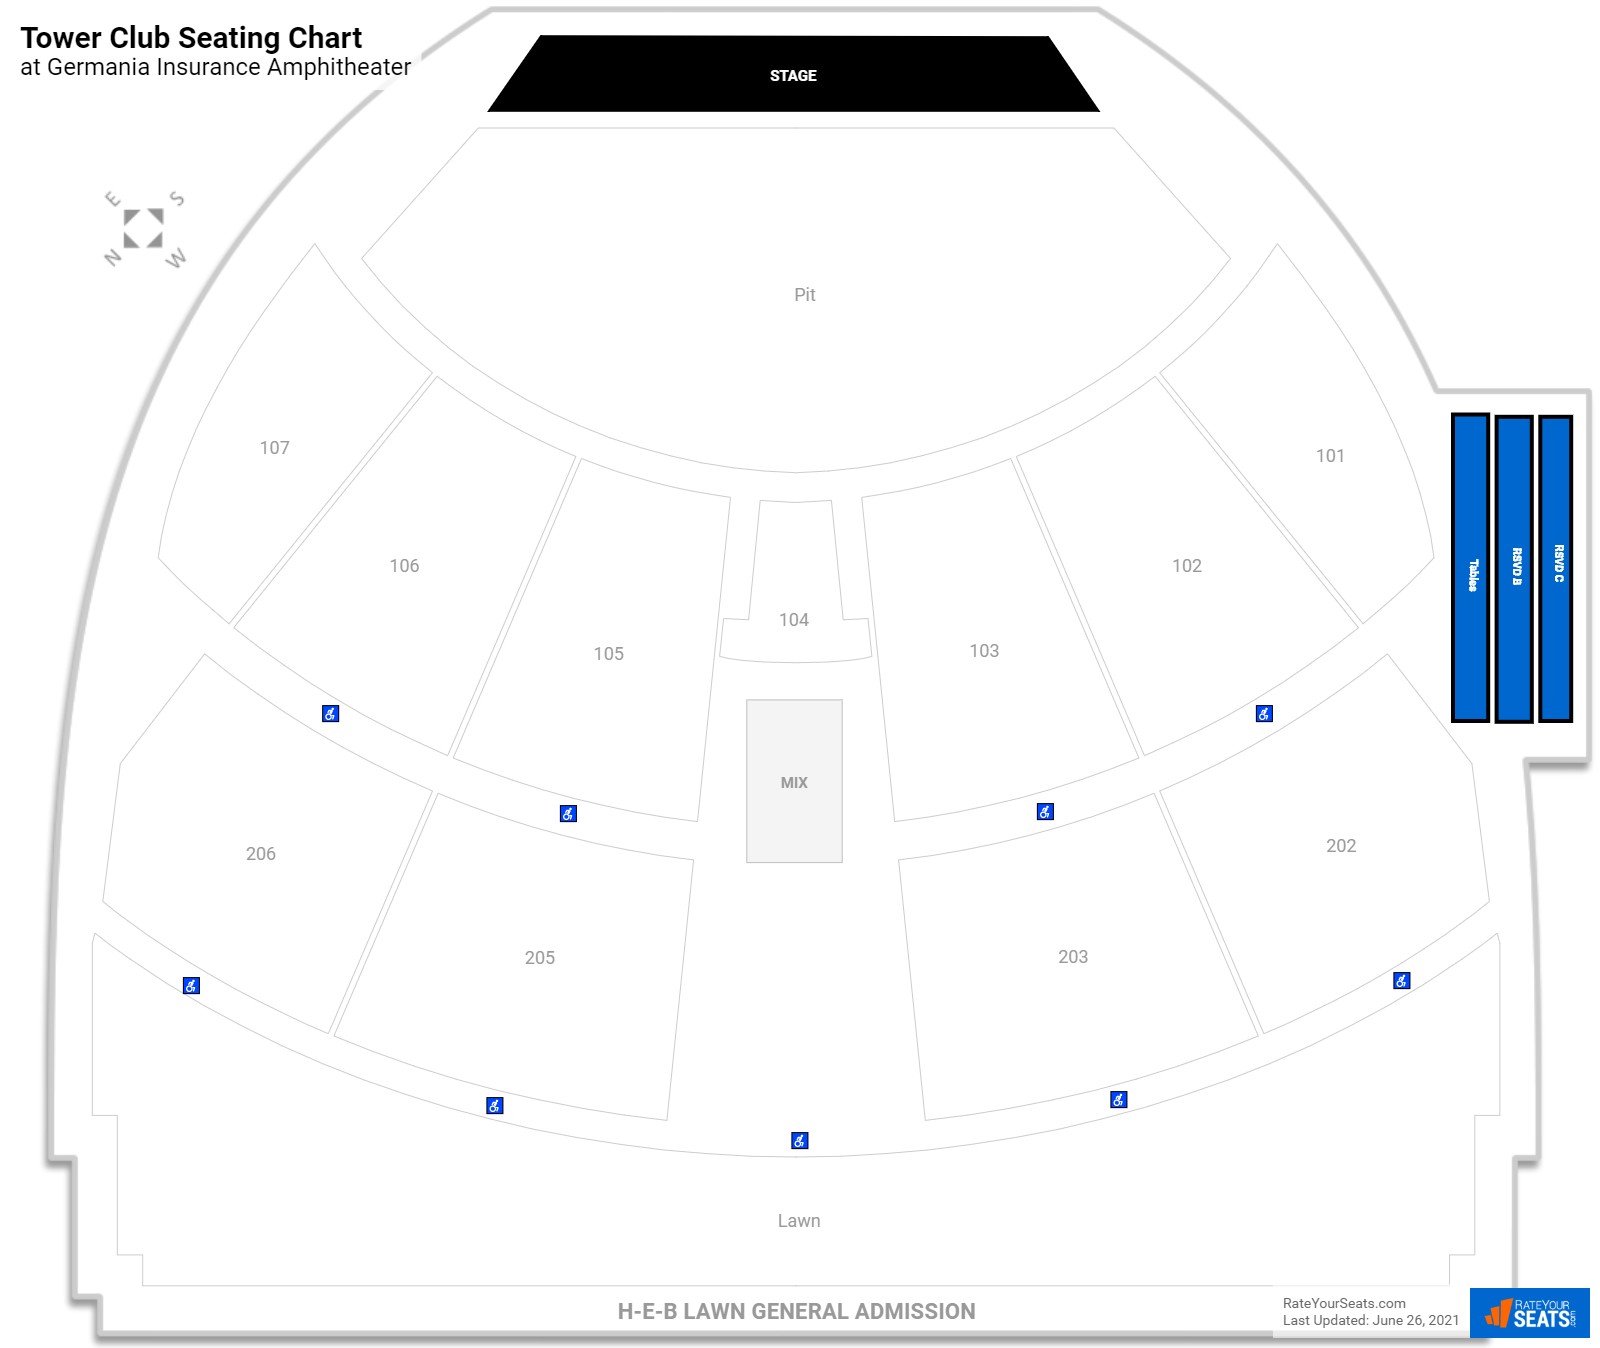 Concert Tower Club Seating Chart at Germania Insurance Amphitheater